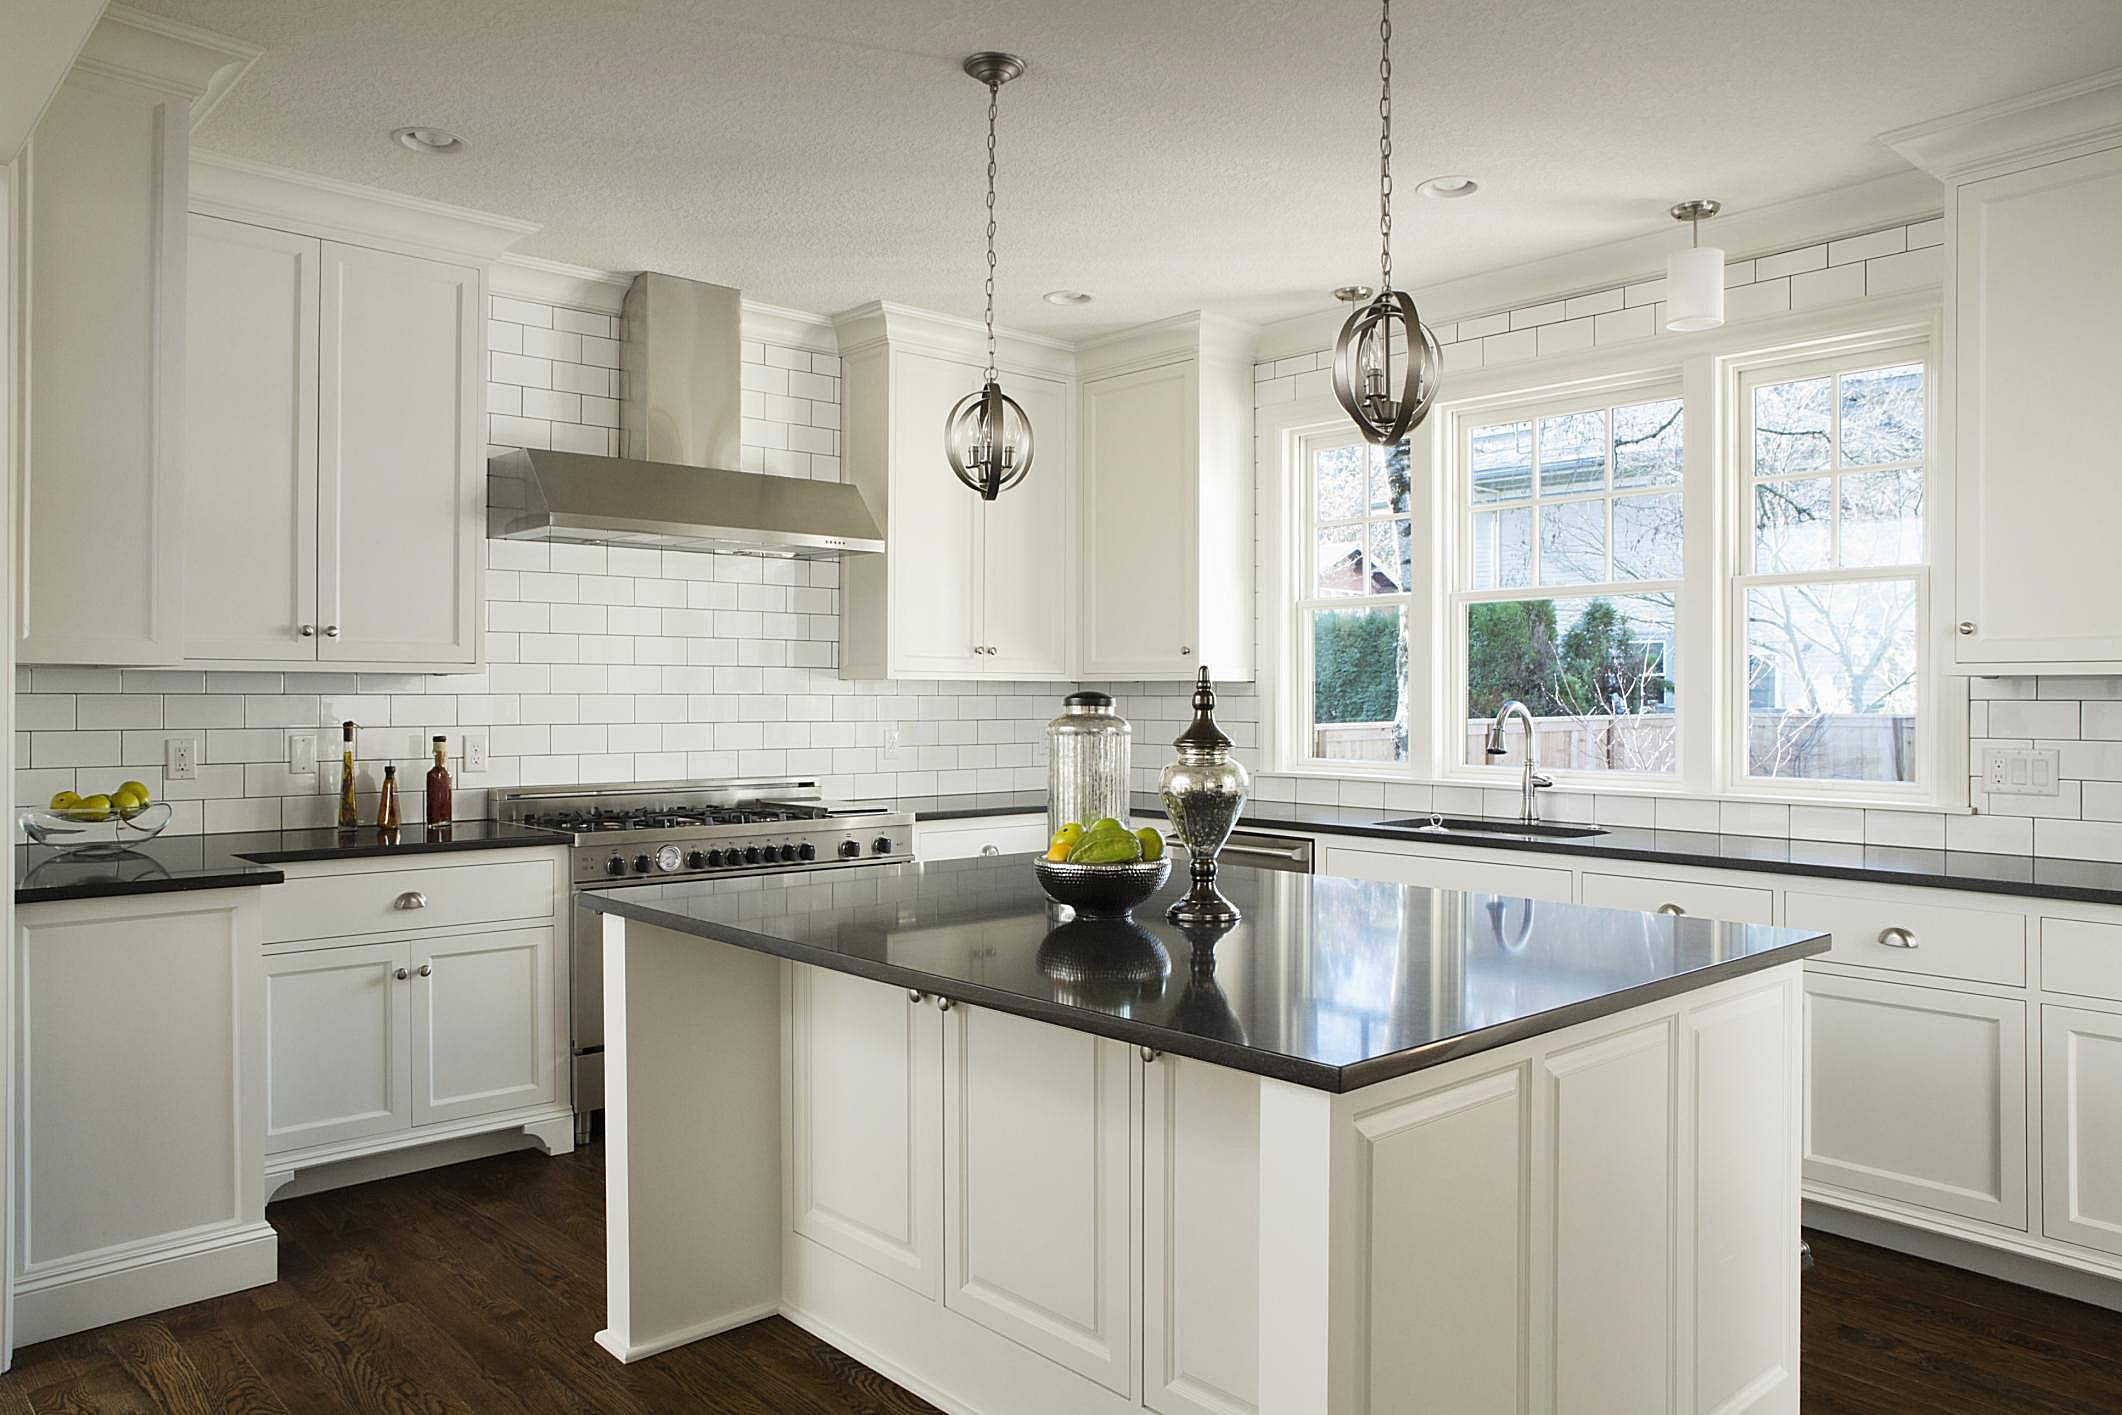 White Kitchen Cabinet Images
 Are White Kitchen Cabinets Boring or Contemporary